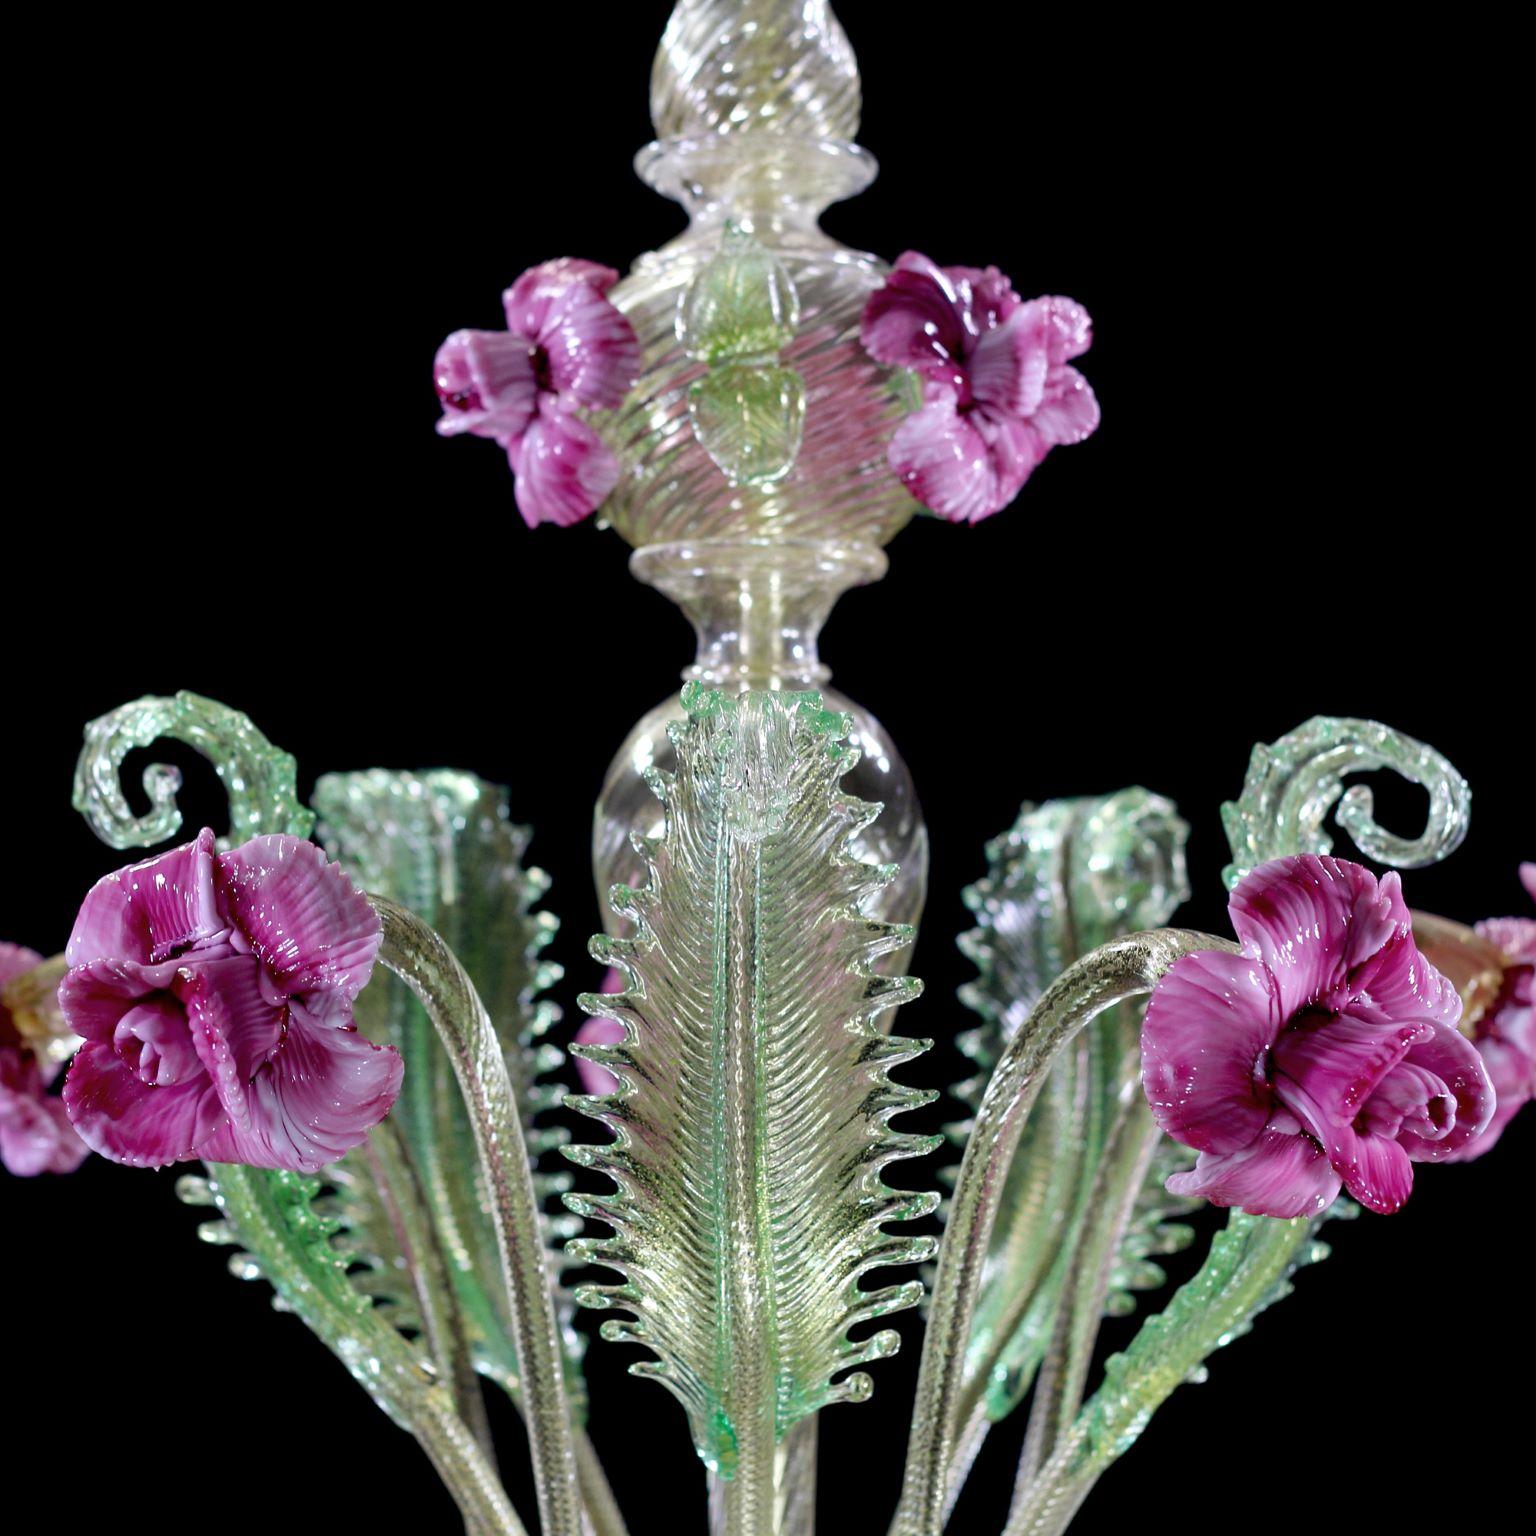 Other Artistic Chandelier 6 Arms Gold Murano Glass Pink and Gree Details by Multiforme For Sale